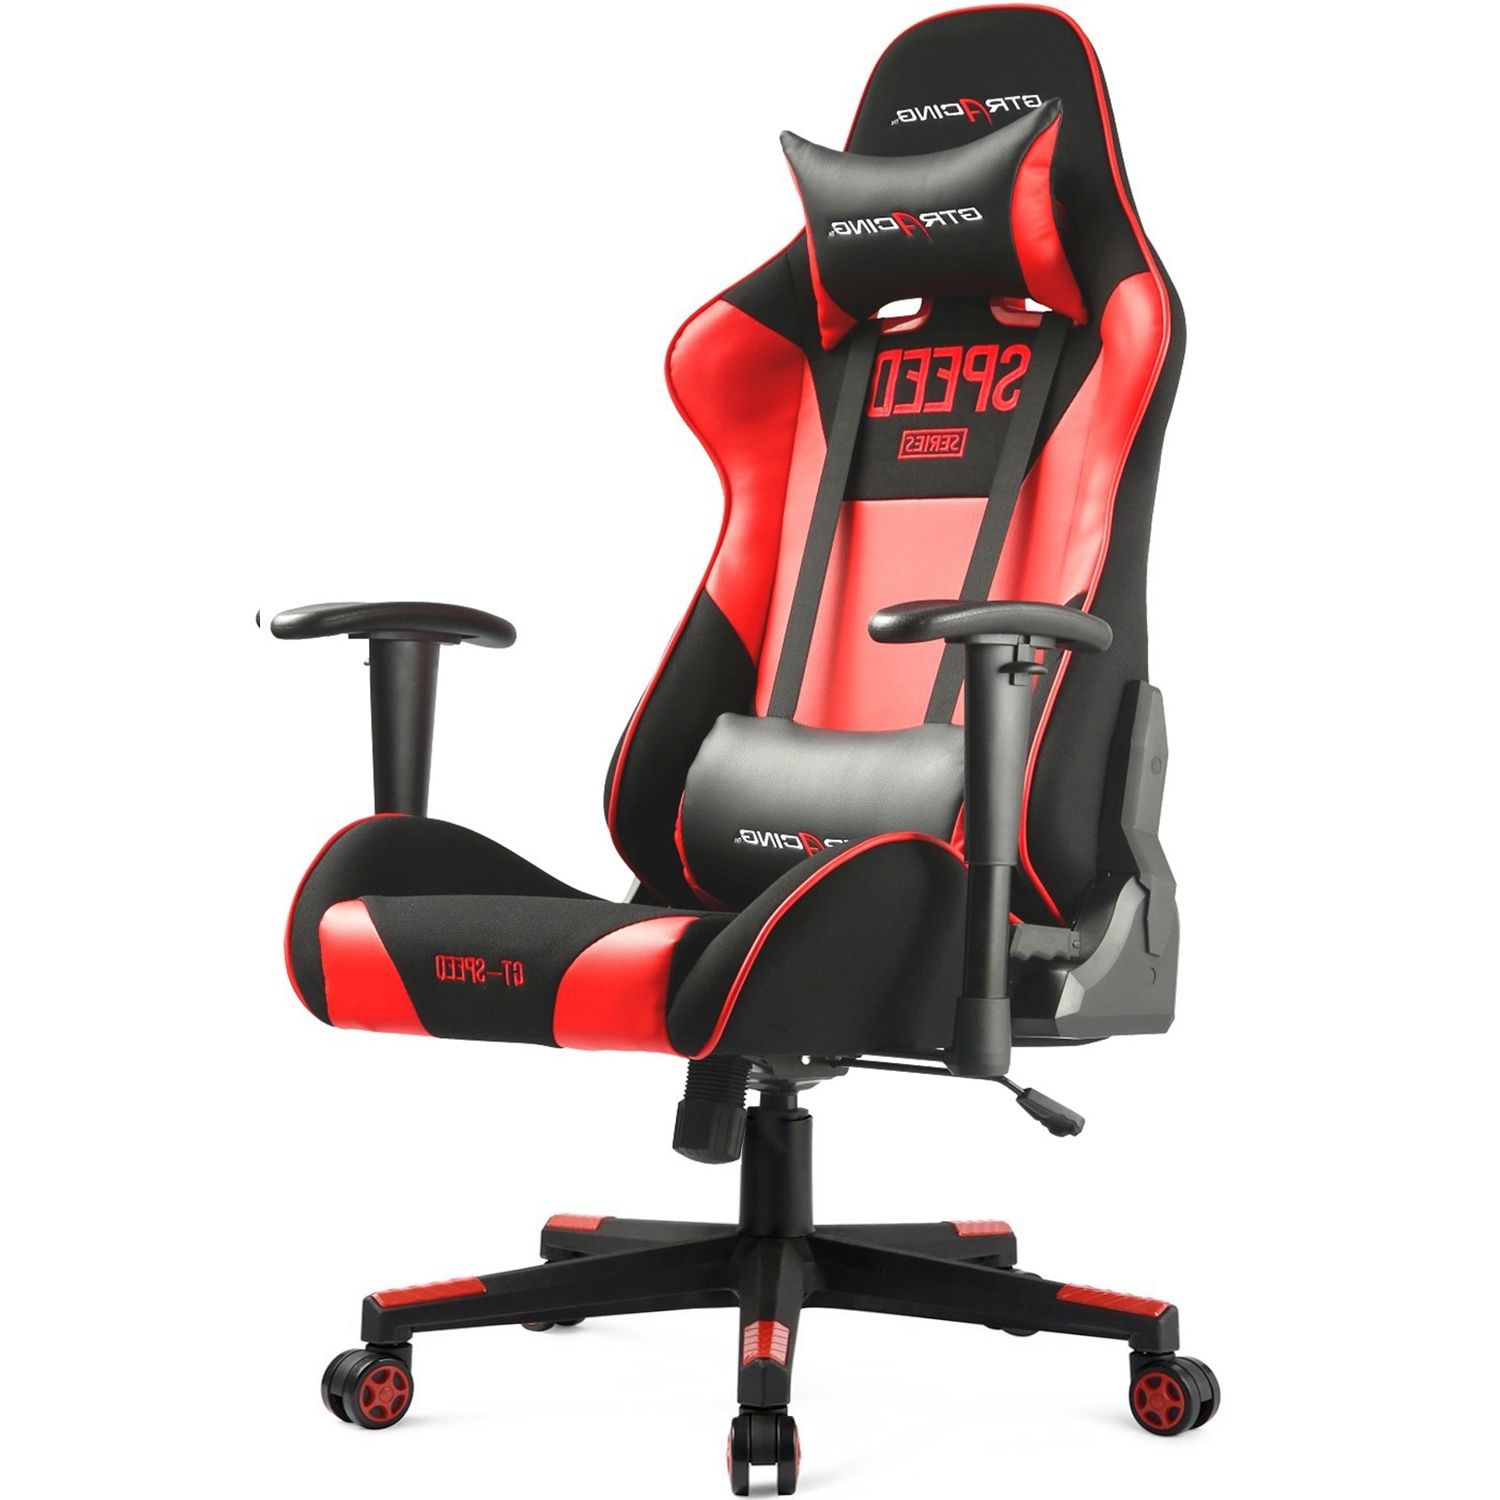 Executive Office Racing Chairs With Regard To Well Known Gtracing Fabric And Pu Racing Chair With Pillows Gt000r (View 12 of 20)